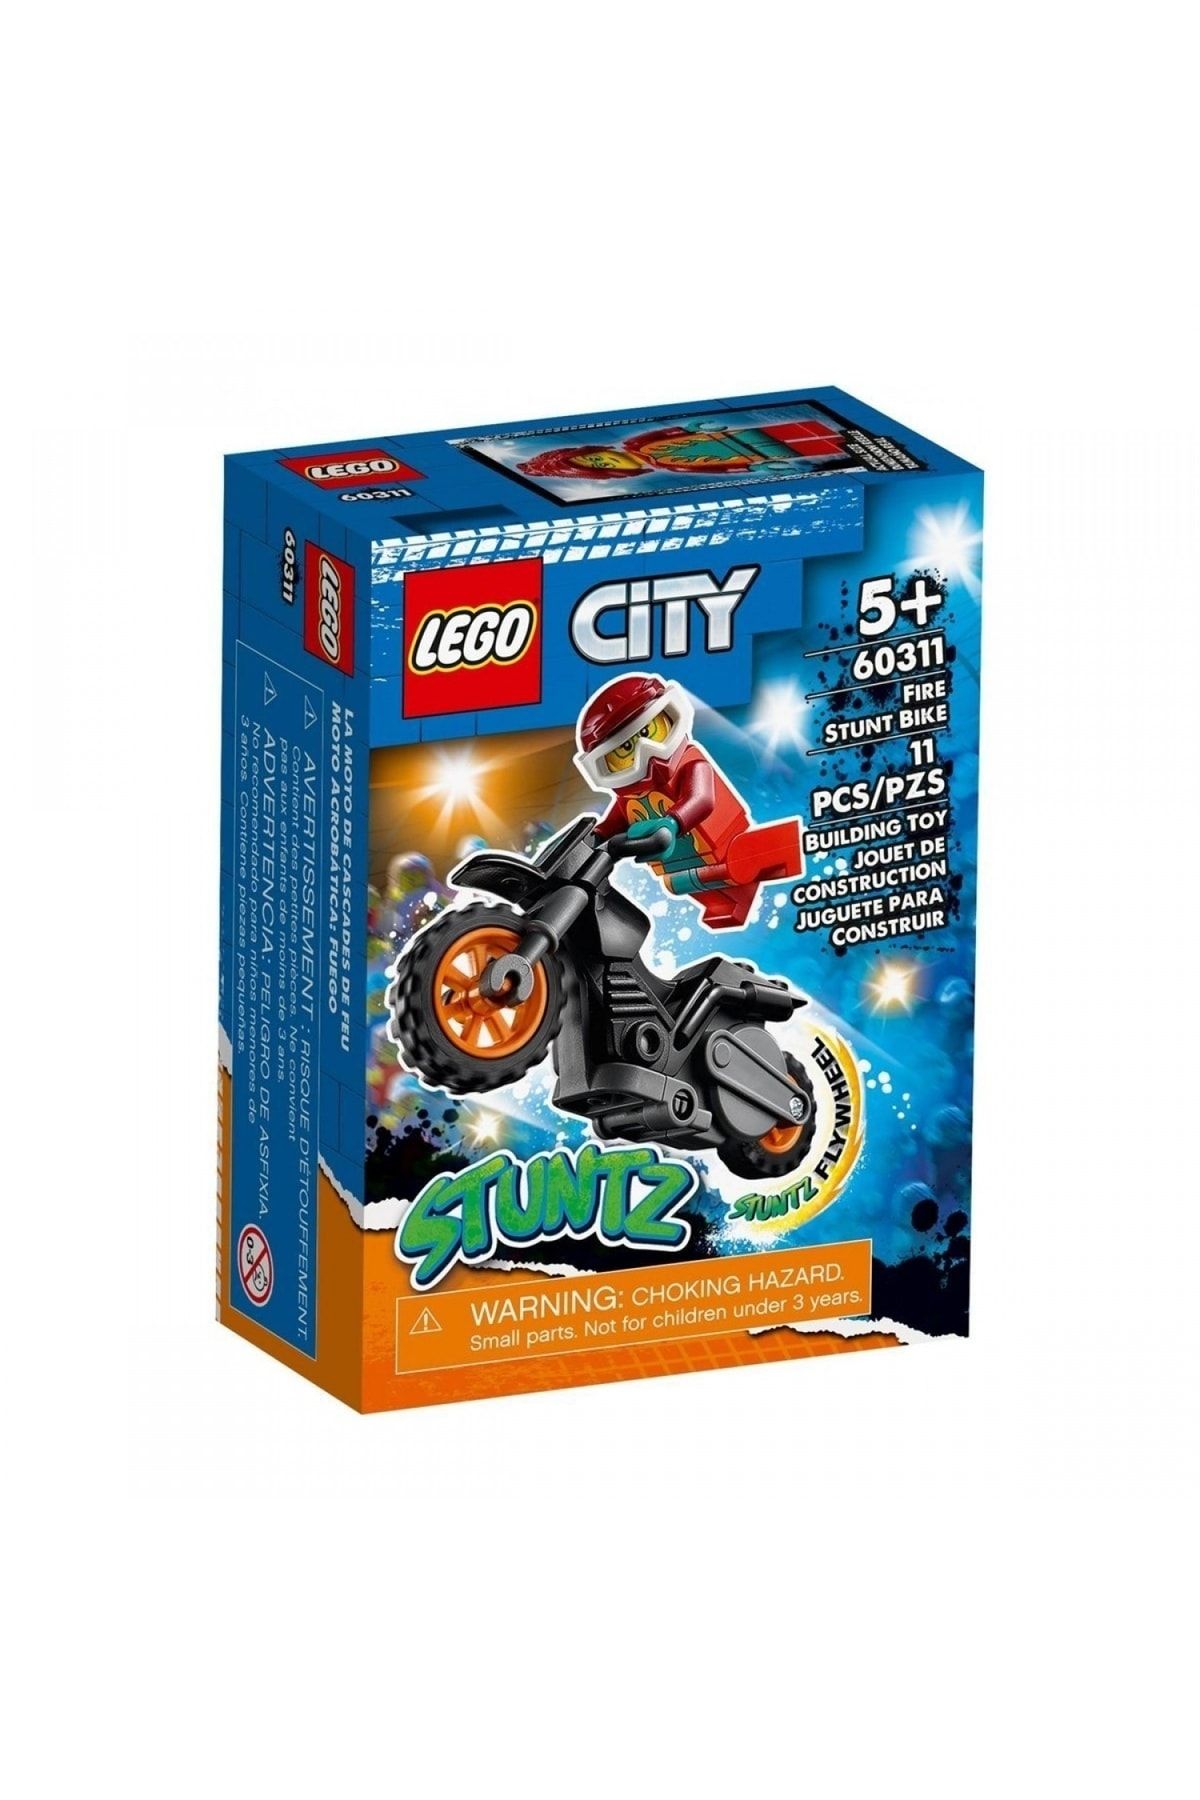 LEGO 60311 Lego® City - Fire Show Motorcycle, 11 Pieces, Ages +5